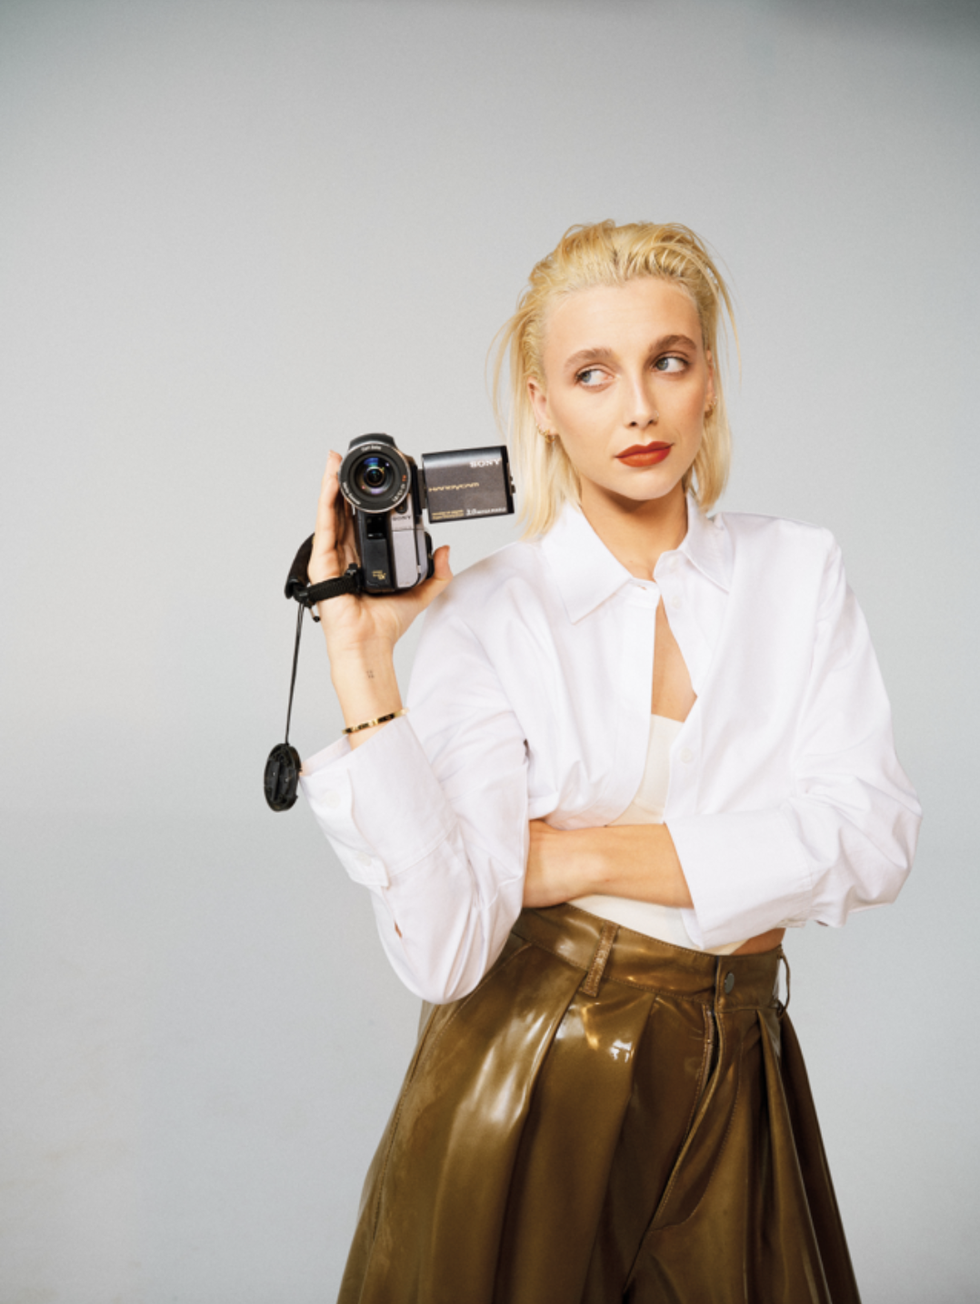 star and content creator Emma Chamberlain named new face of Lancôme